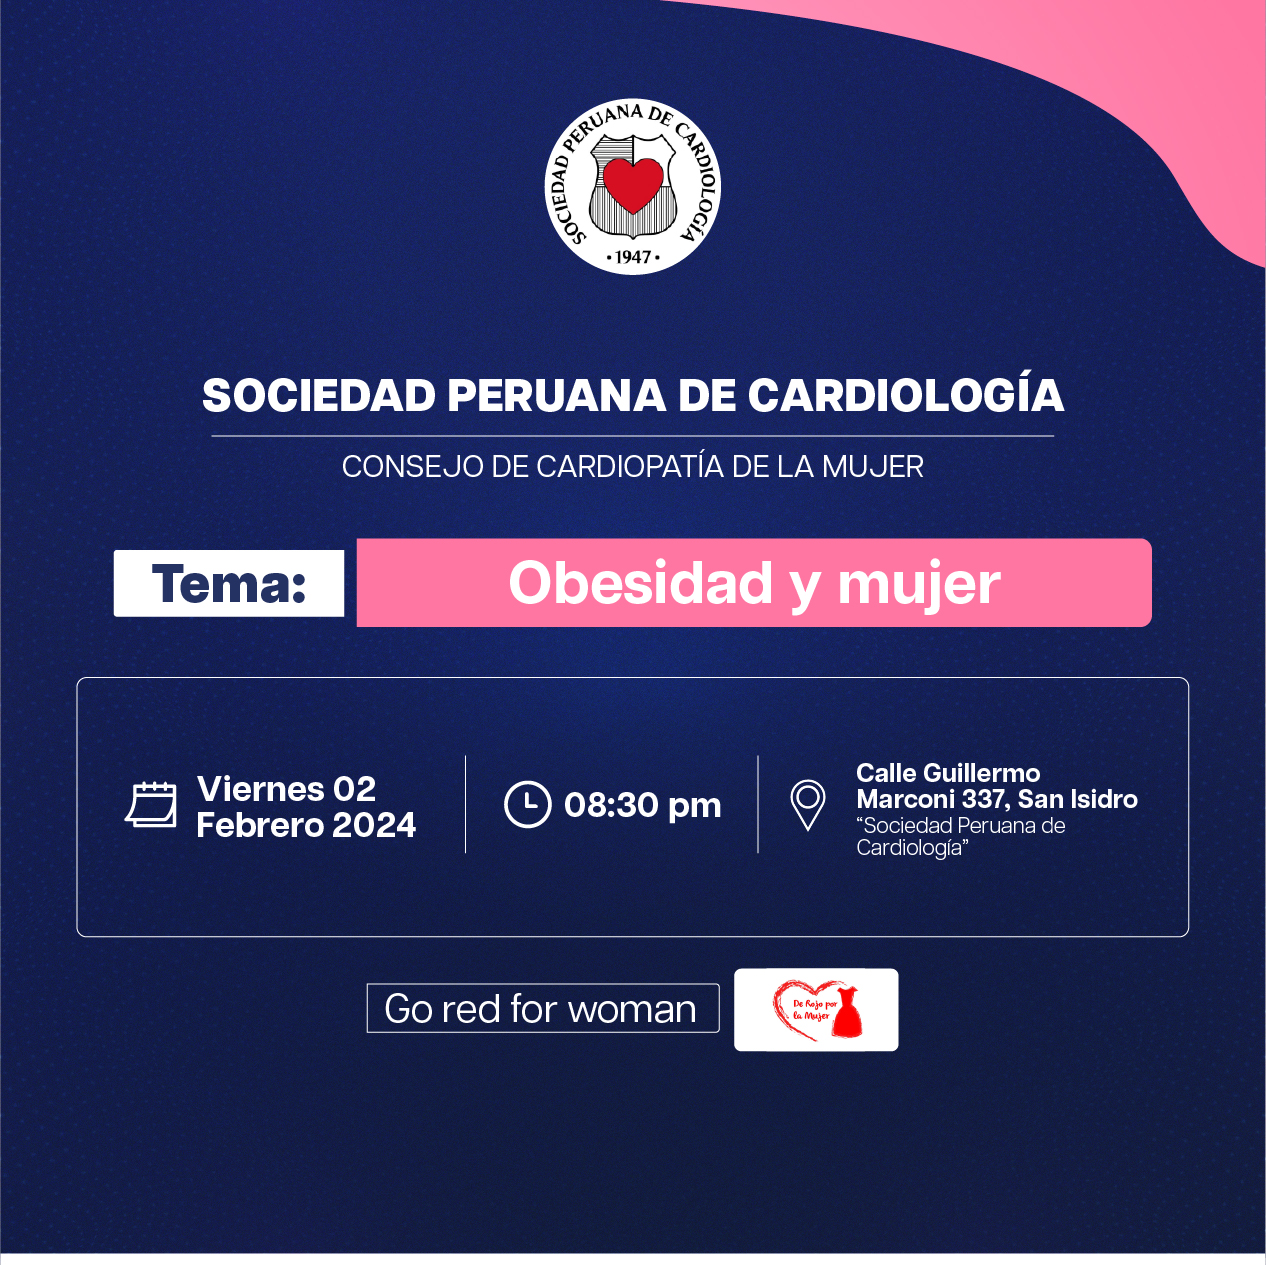 Obesidad y mujer (Go red for woman)